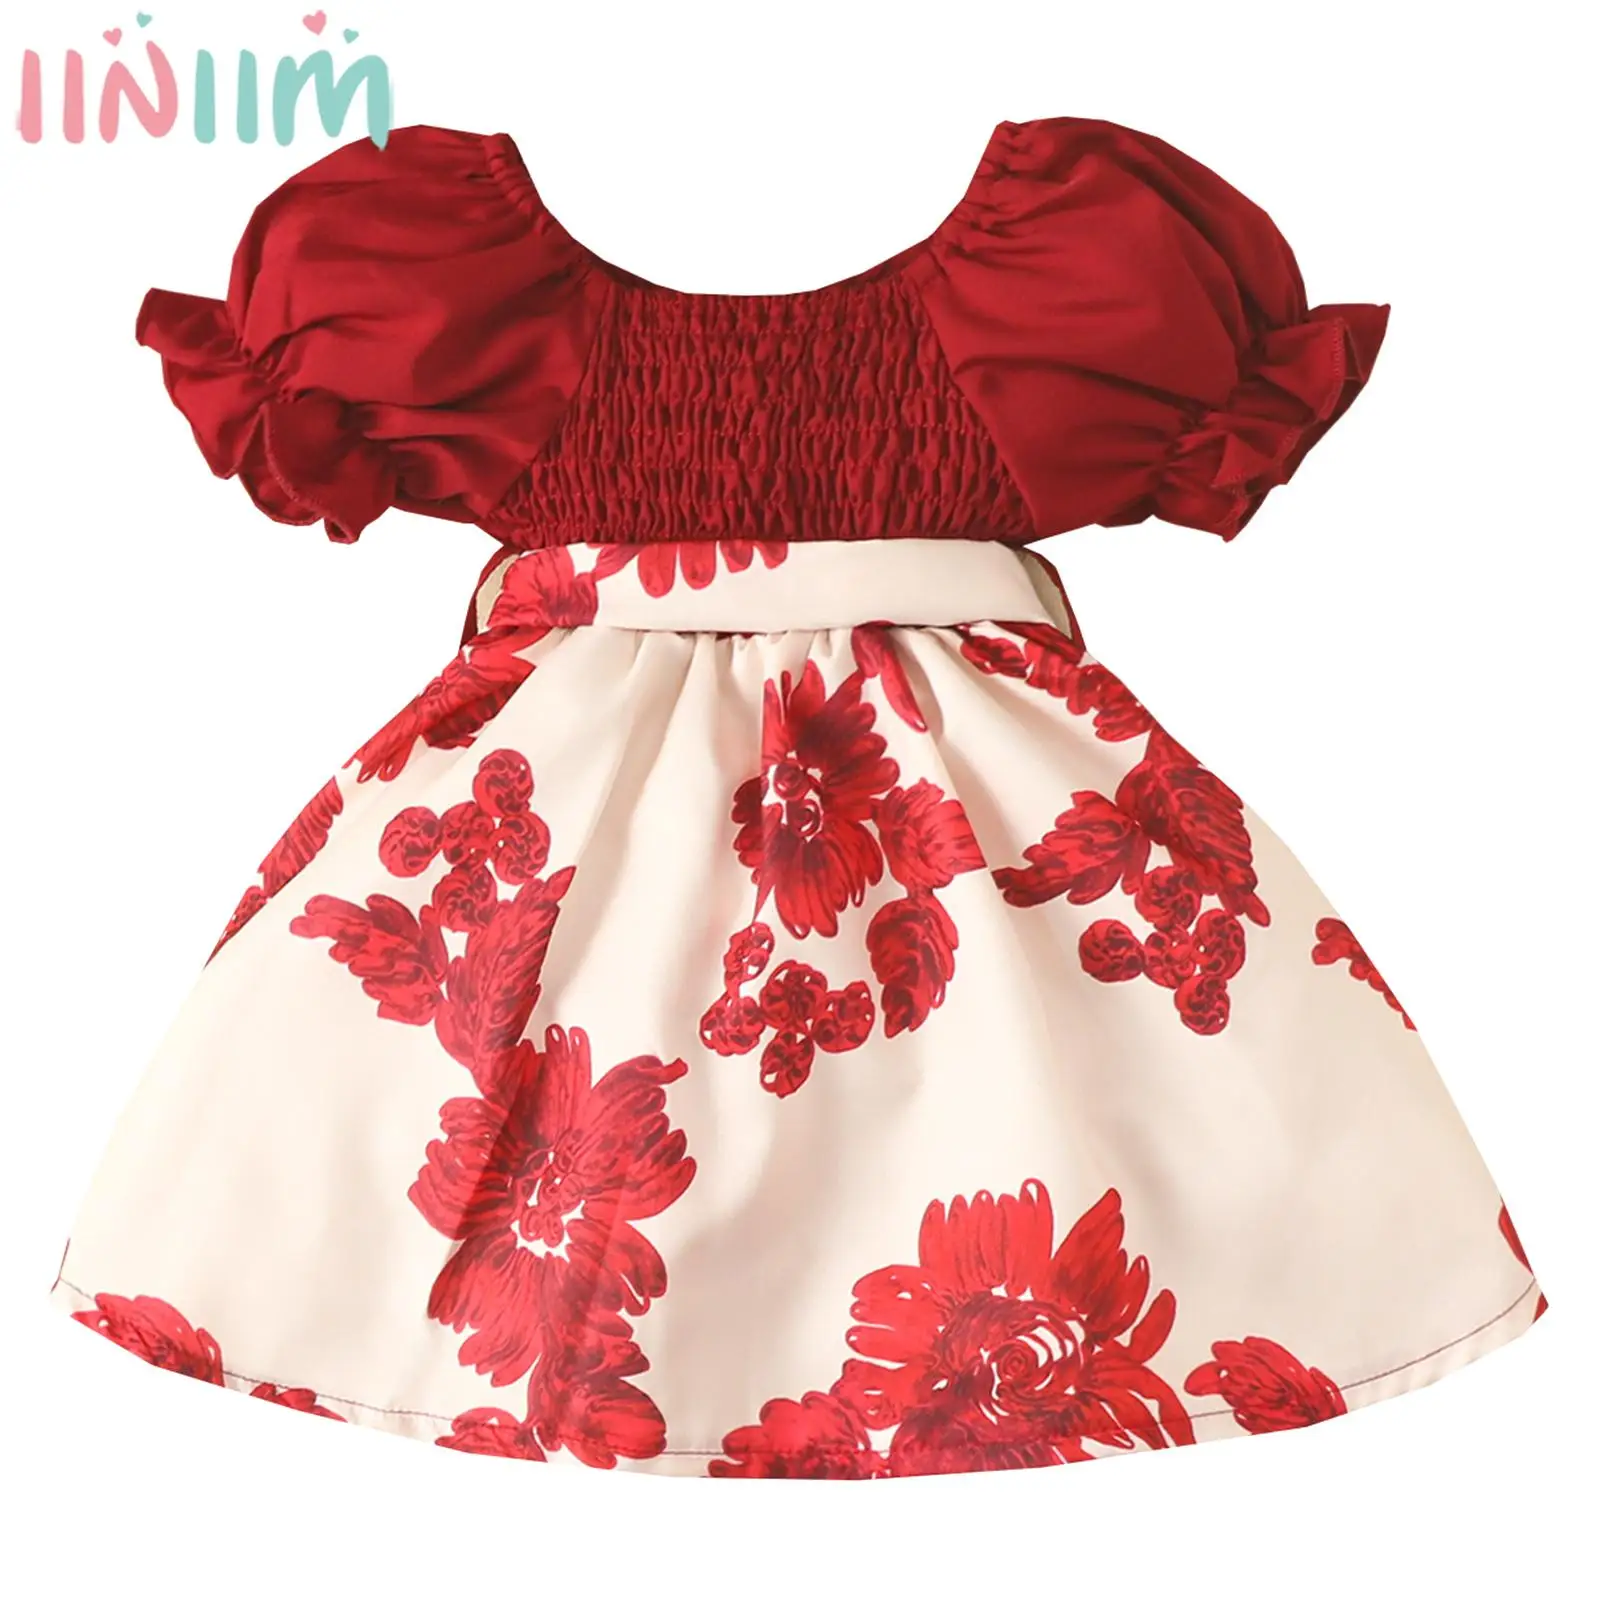 

Kid Girls Cute Casual Princess Dress Short Sleeve Ruched Floral Print Preppy Style Dresses for Wedding Birthday Party Daily Wear